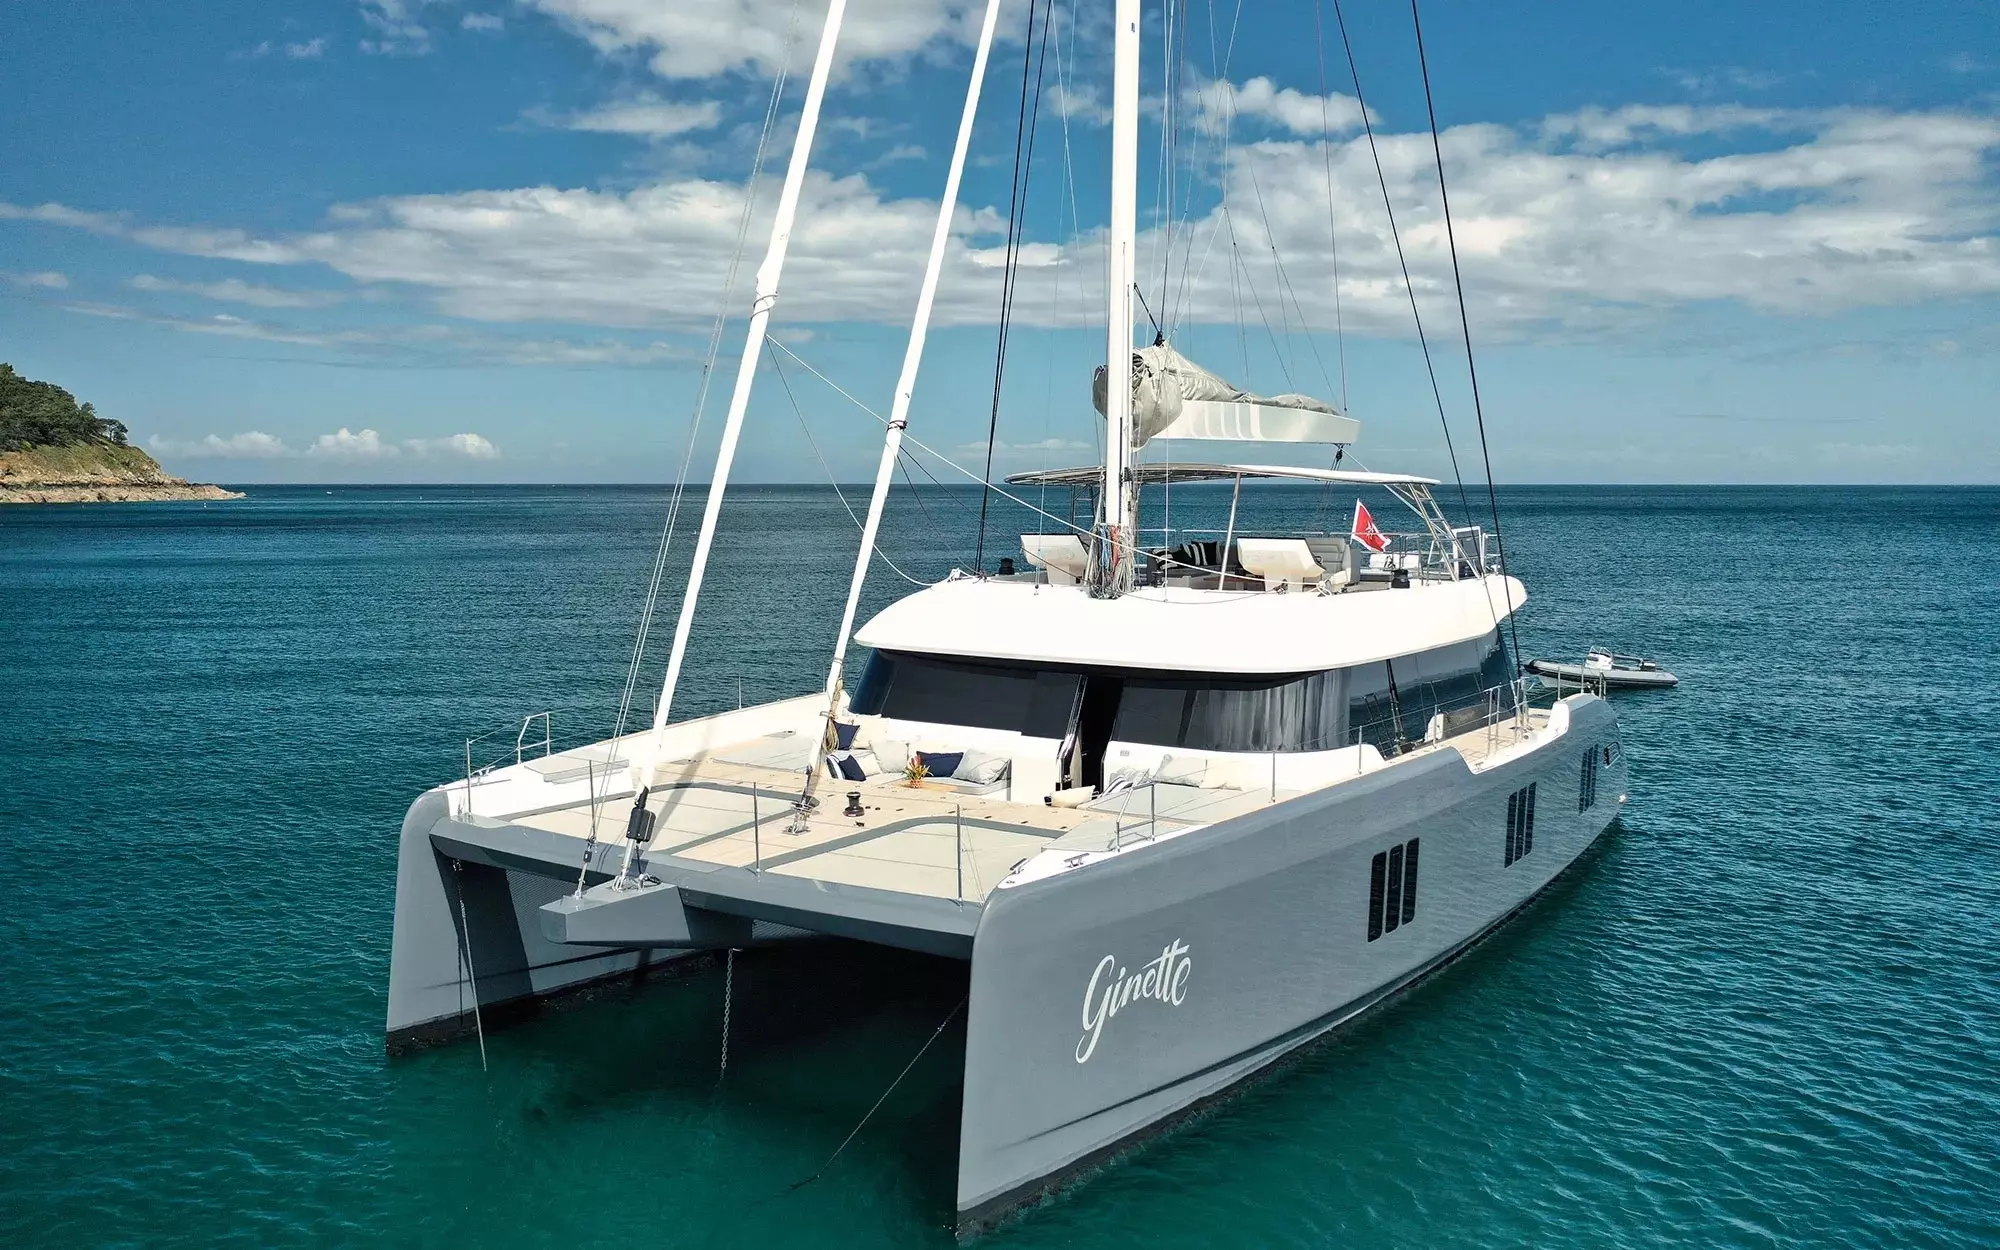 Ginette by Sunreef Yachts - Special Offer for a private Luxury Catamaran Charter in Tahiti with a crew